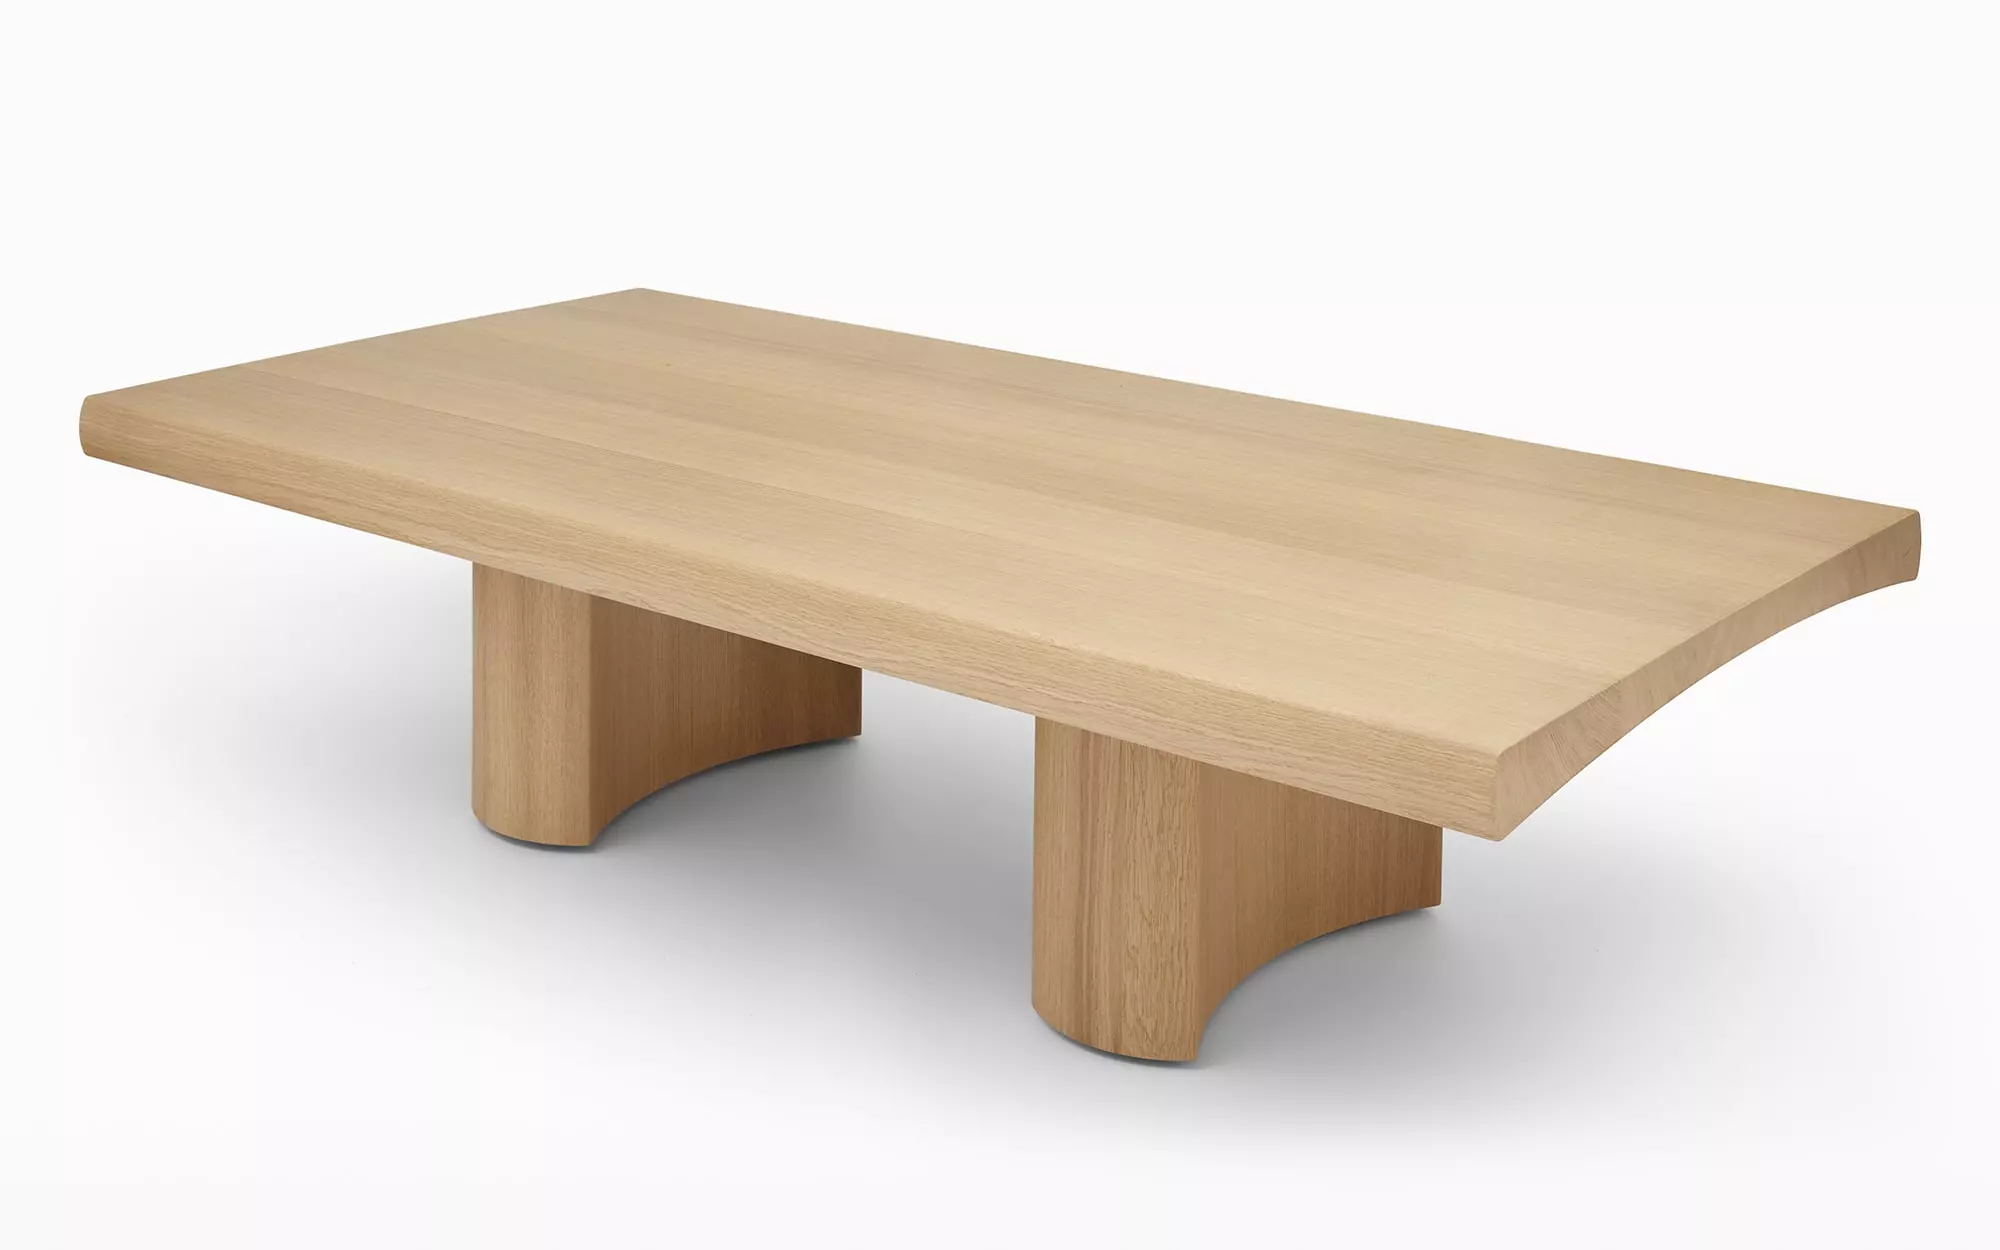 Hakone Coffee table - Edward and Jay Barber and Osgerby - coffee-table - Galerie kreo